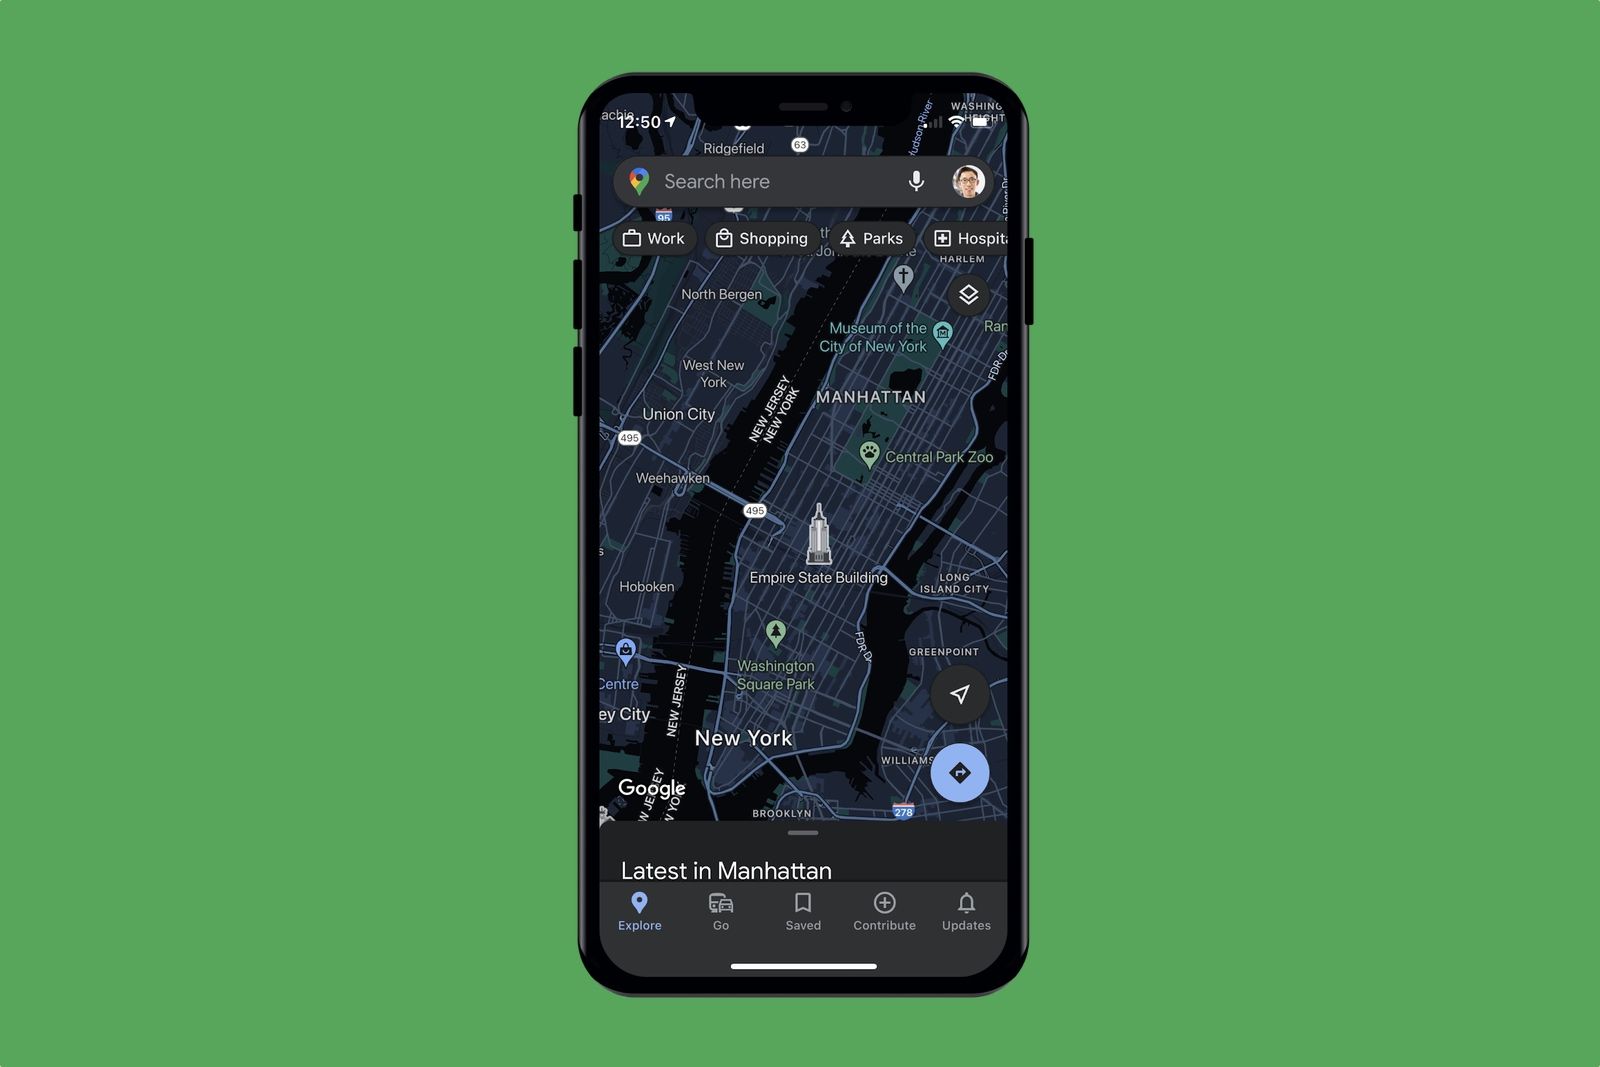 Google Maps on iOS is finally getting dark mode integration - here's how to enable it photo 1